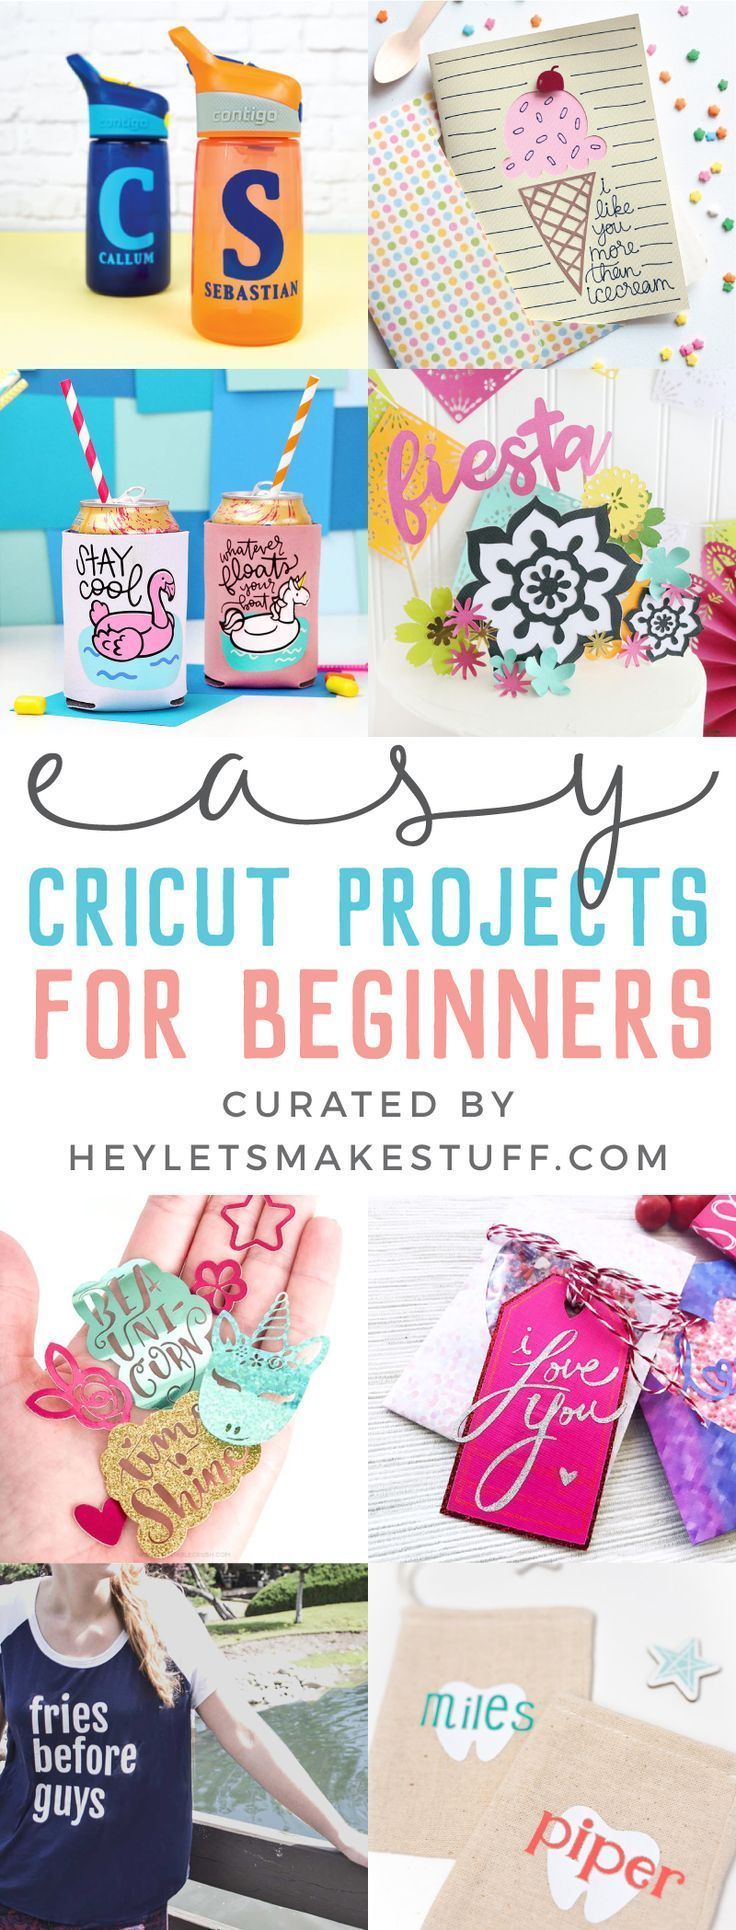 Cricut Projects for Beginners -   17 diy projects Useful creative ideas